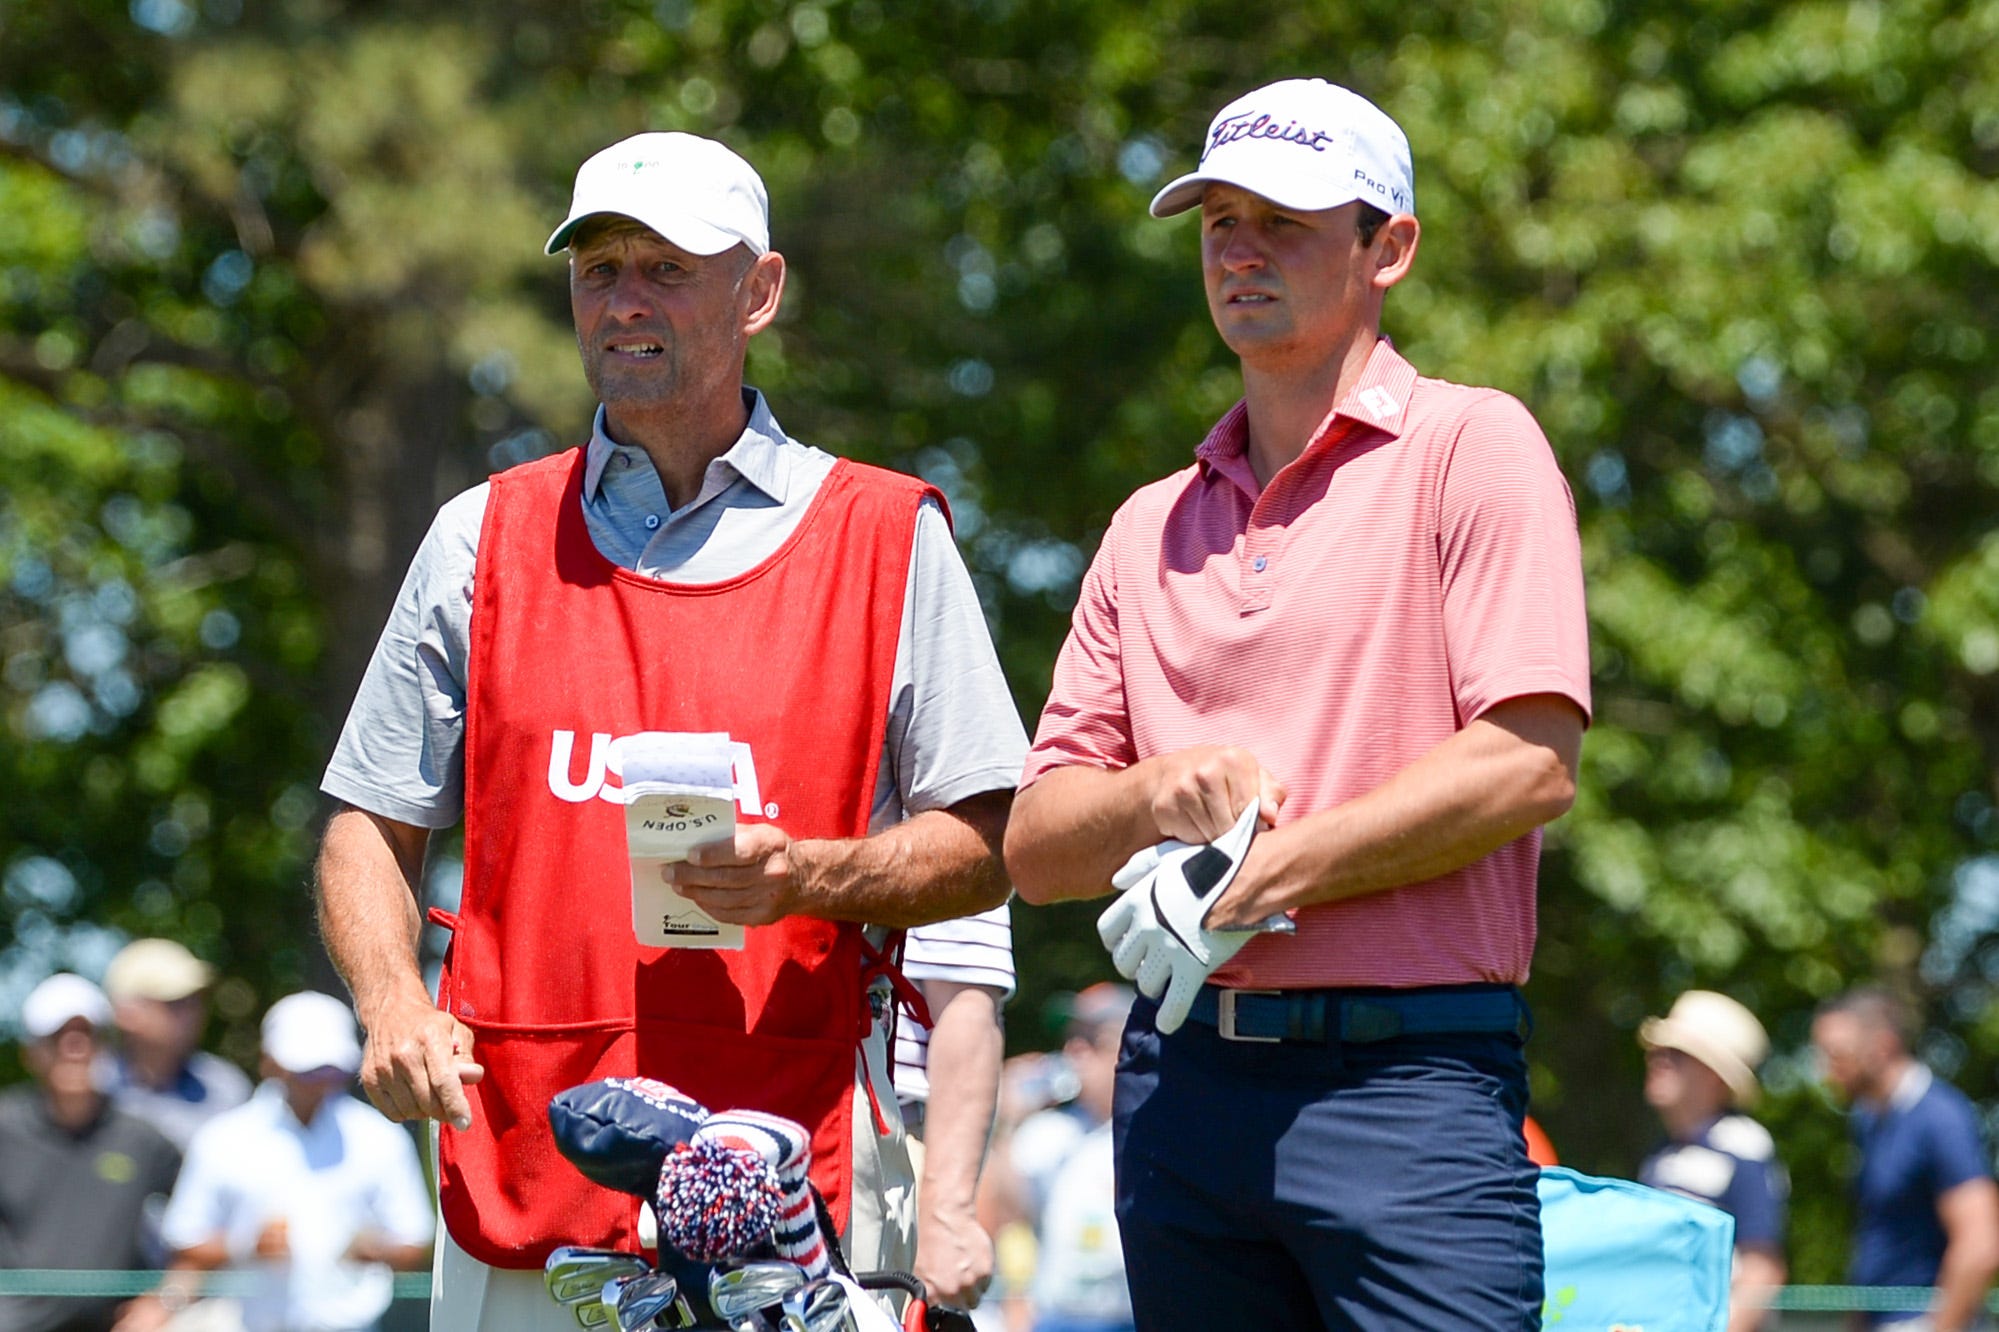 Fireman Matt Parziale gives ultimate Father&apos;s Day gift at U.S. Open